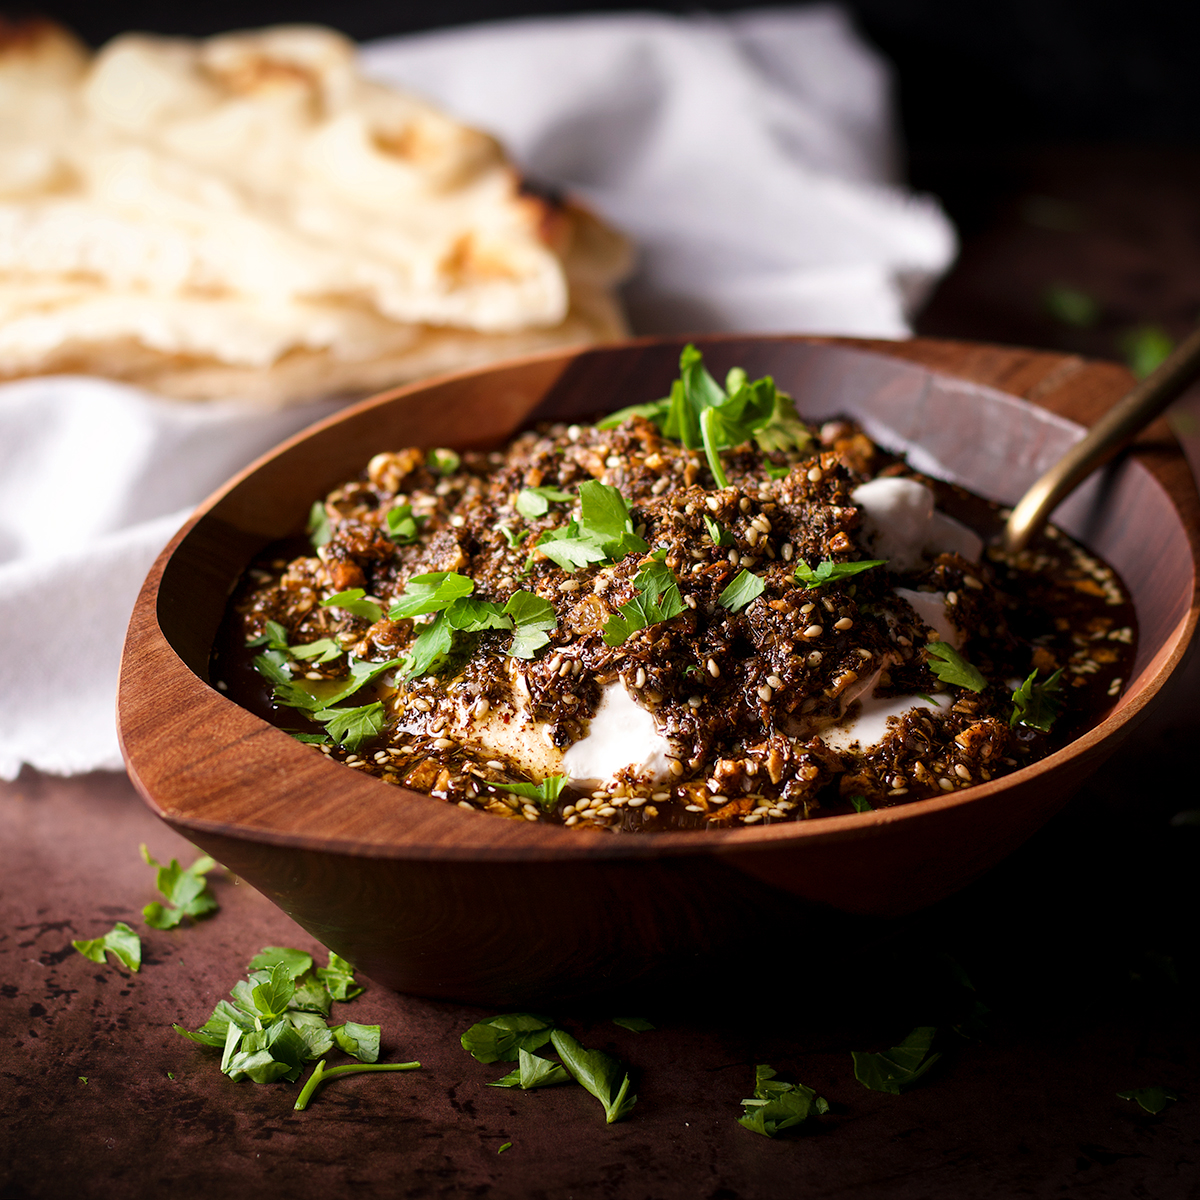 A wood bowl filled with za'atar labneh with crispy garlic sitting next to a stack of buttered naan.